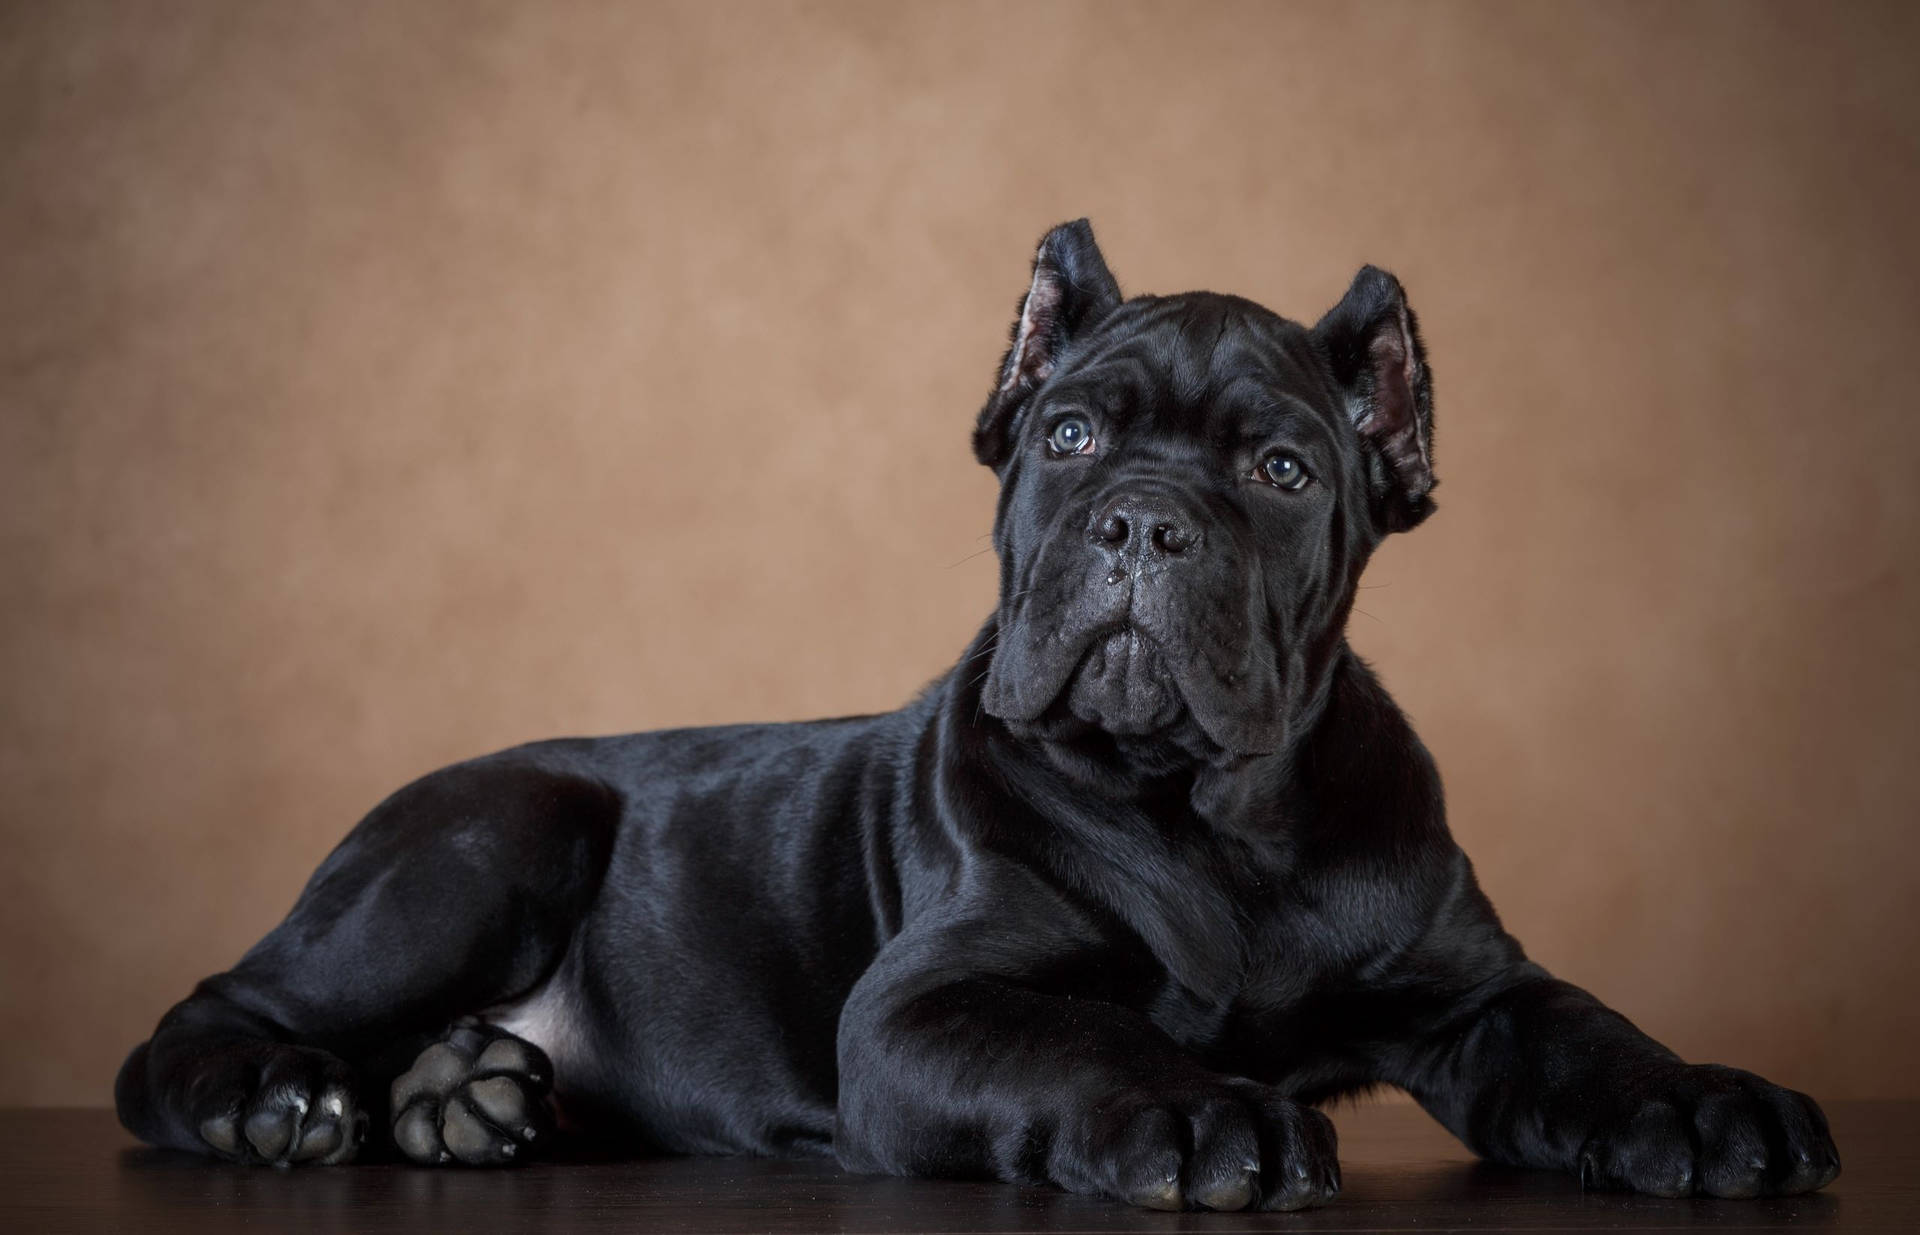 Free Cane Corso Wallpaper Downloads, [100+] Cane Corso Wallpapers for FREE  